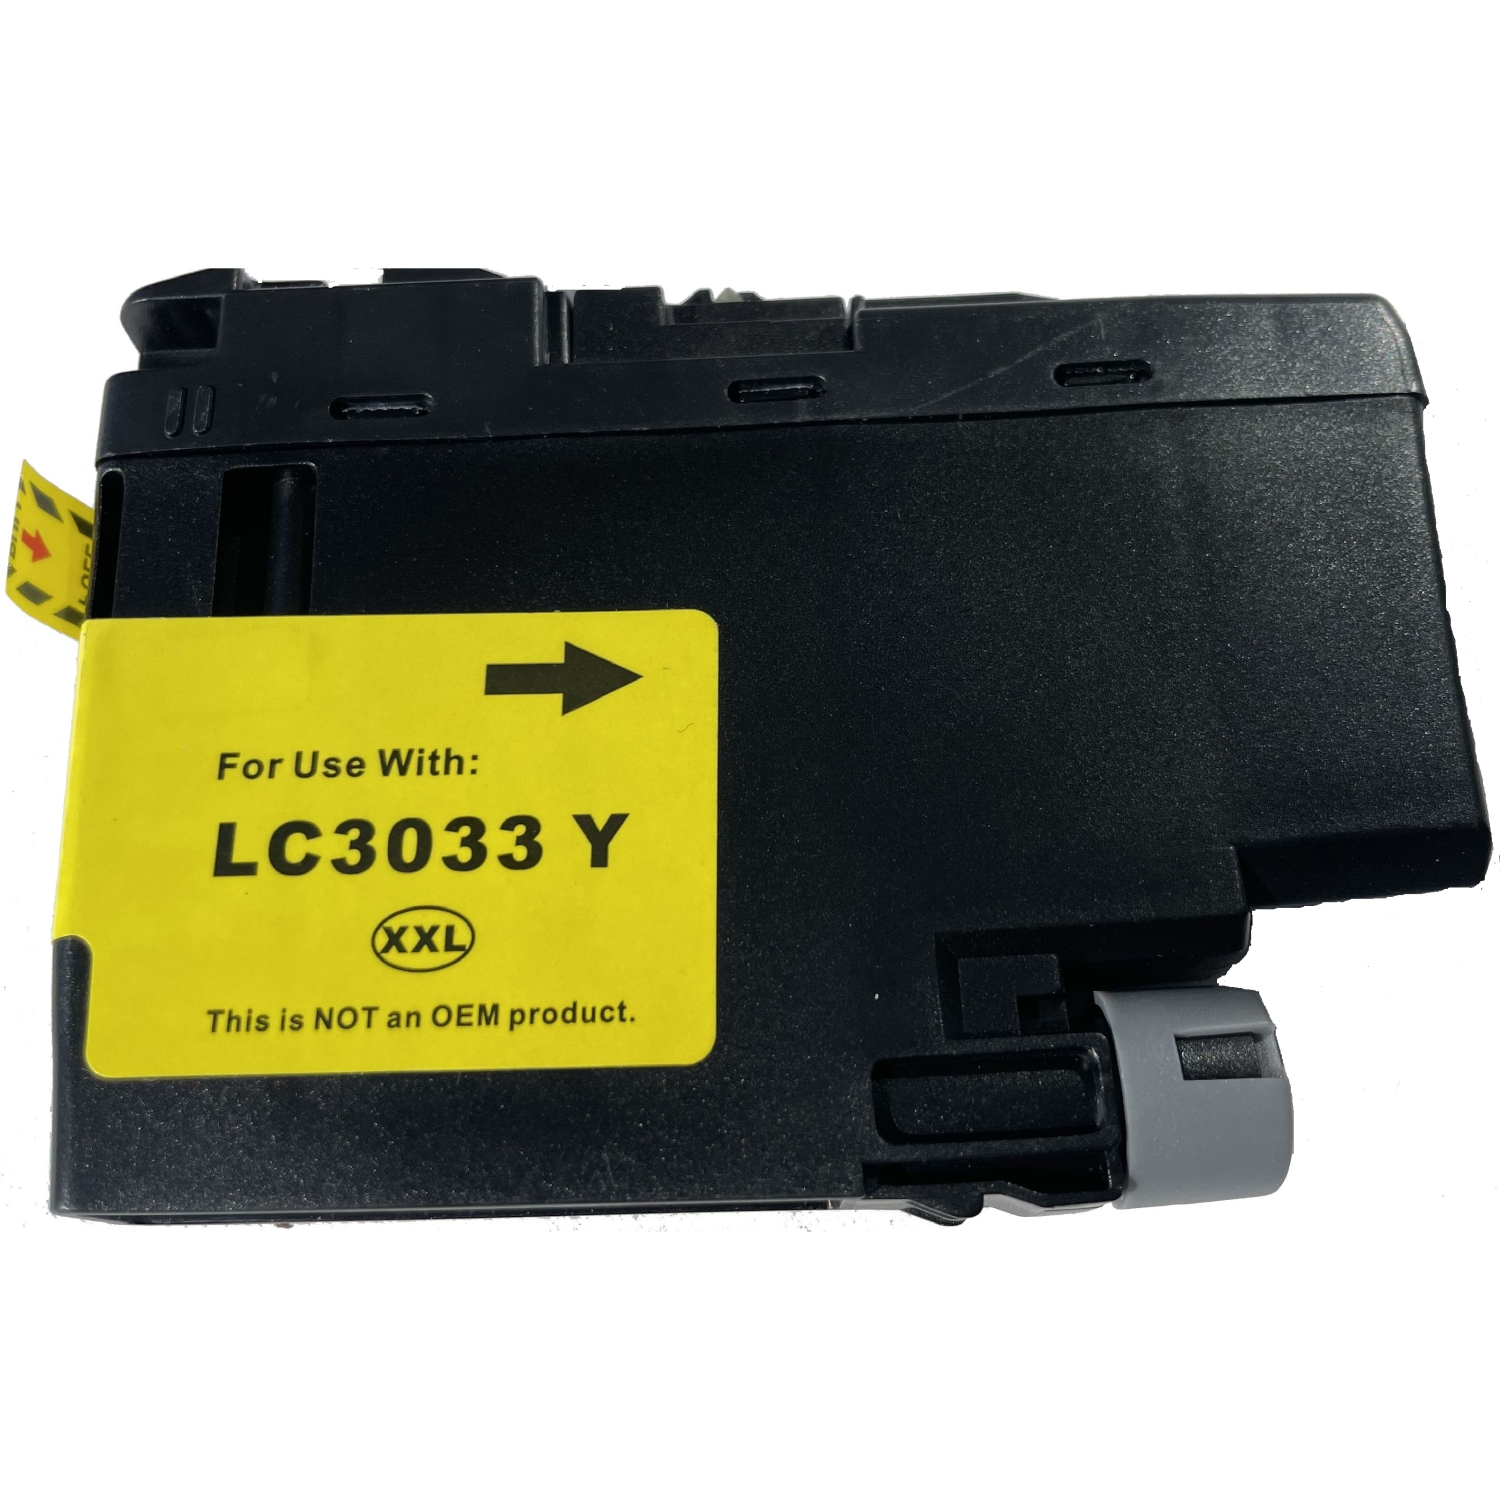 TONER4U - 1Yellow Ink Cartridge LC3033 XXL Compatible Extra High Yield for Brother LC3033 MFC-J805DW, MFC-J995DW, MFC-J995DWX